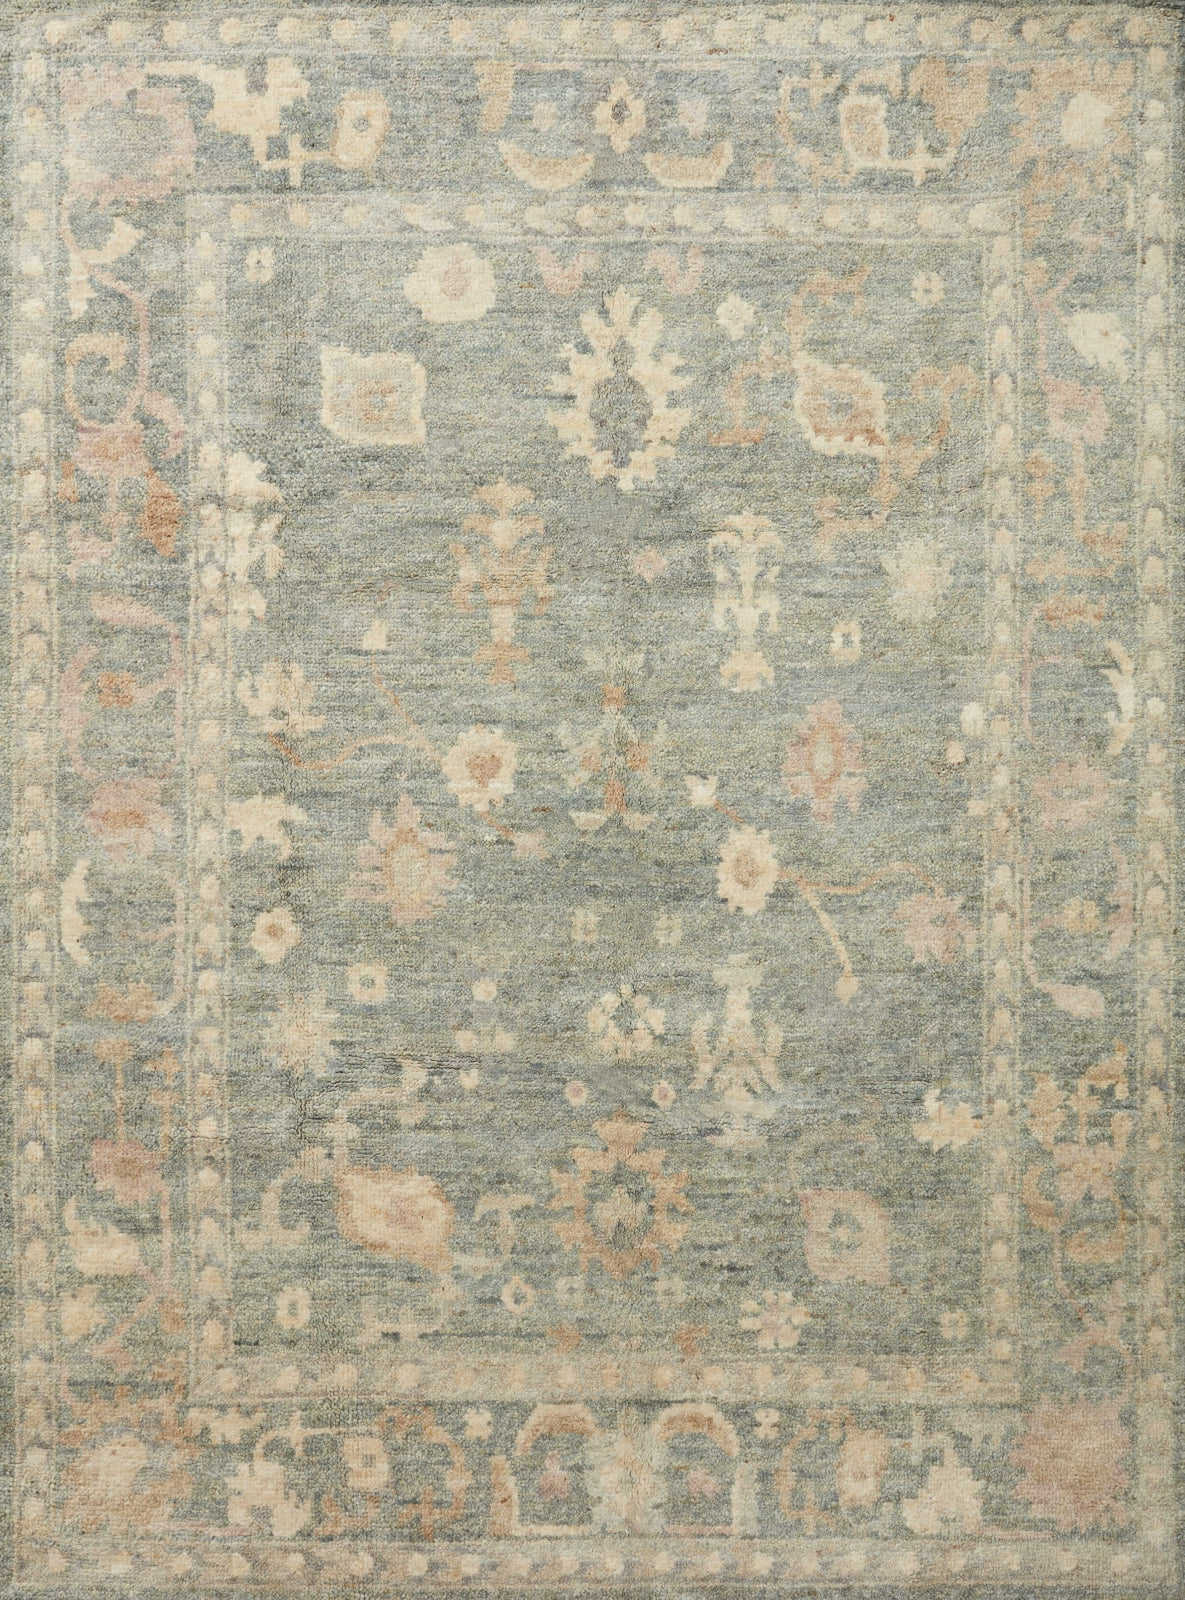 Loloi Clement CLM-03 Slate / Natural Area Rug